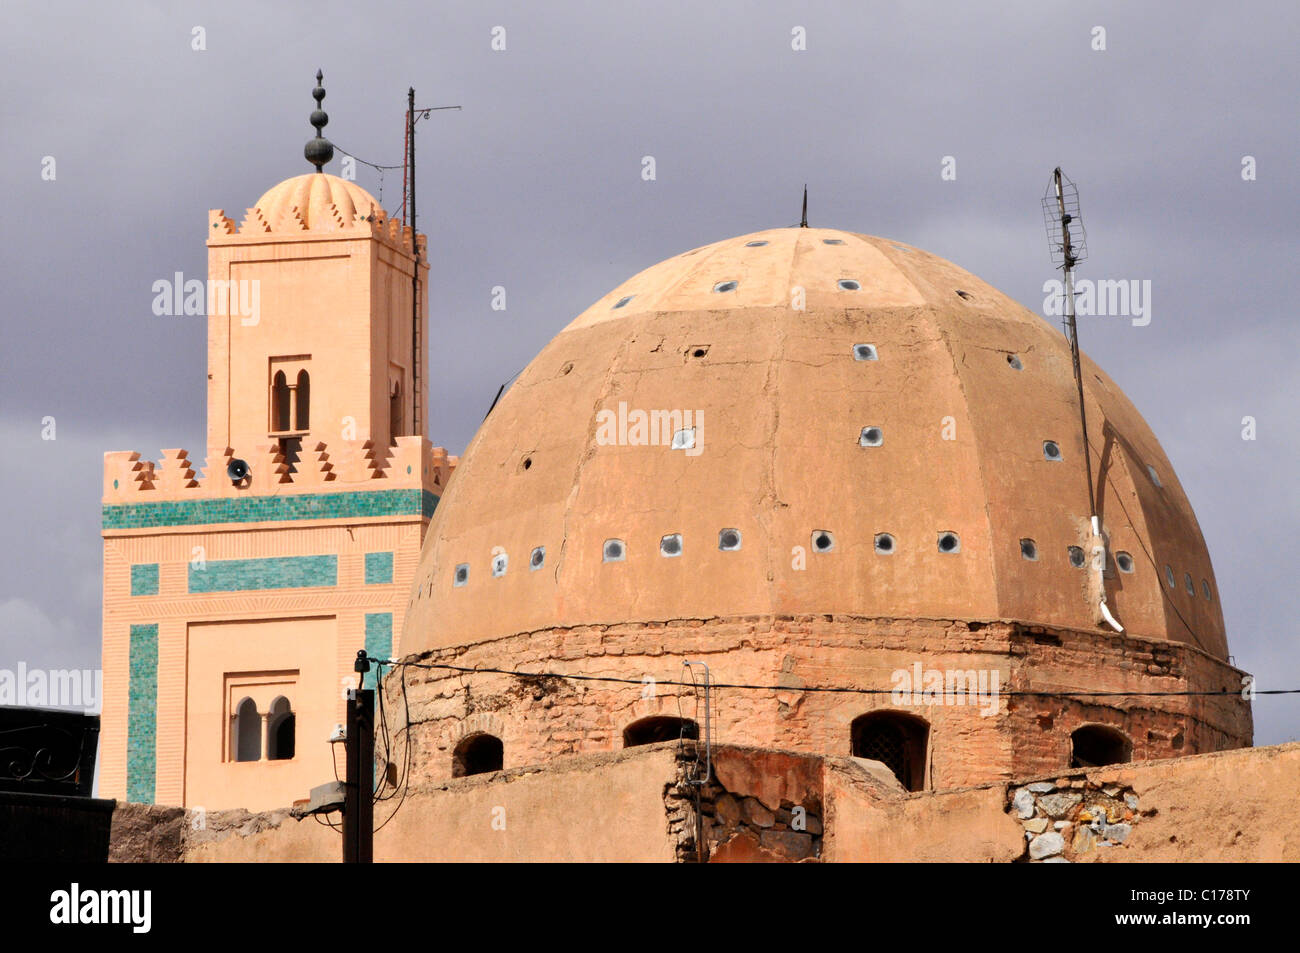 Dome and minaret of the Ben Youssef Mosque in the medina quarter of Marrakesh, Morocco, Africa Stock Photo